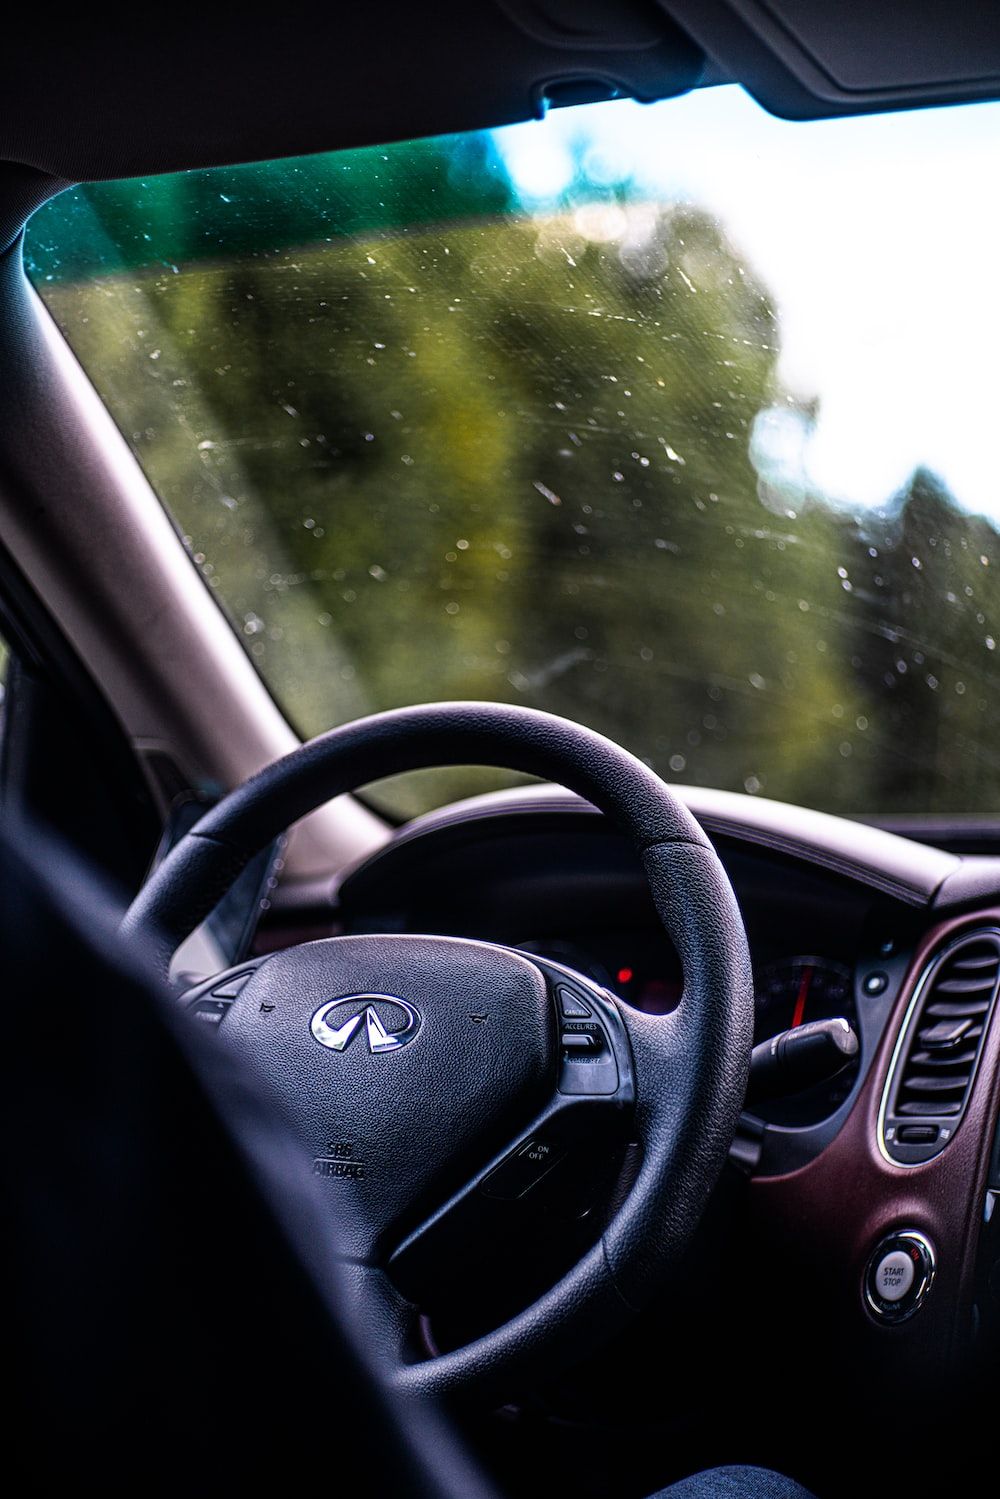 A car's steering wheel and dashboard, with raindrops visible on the windshield - Cars